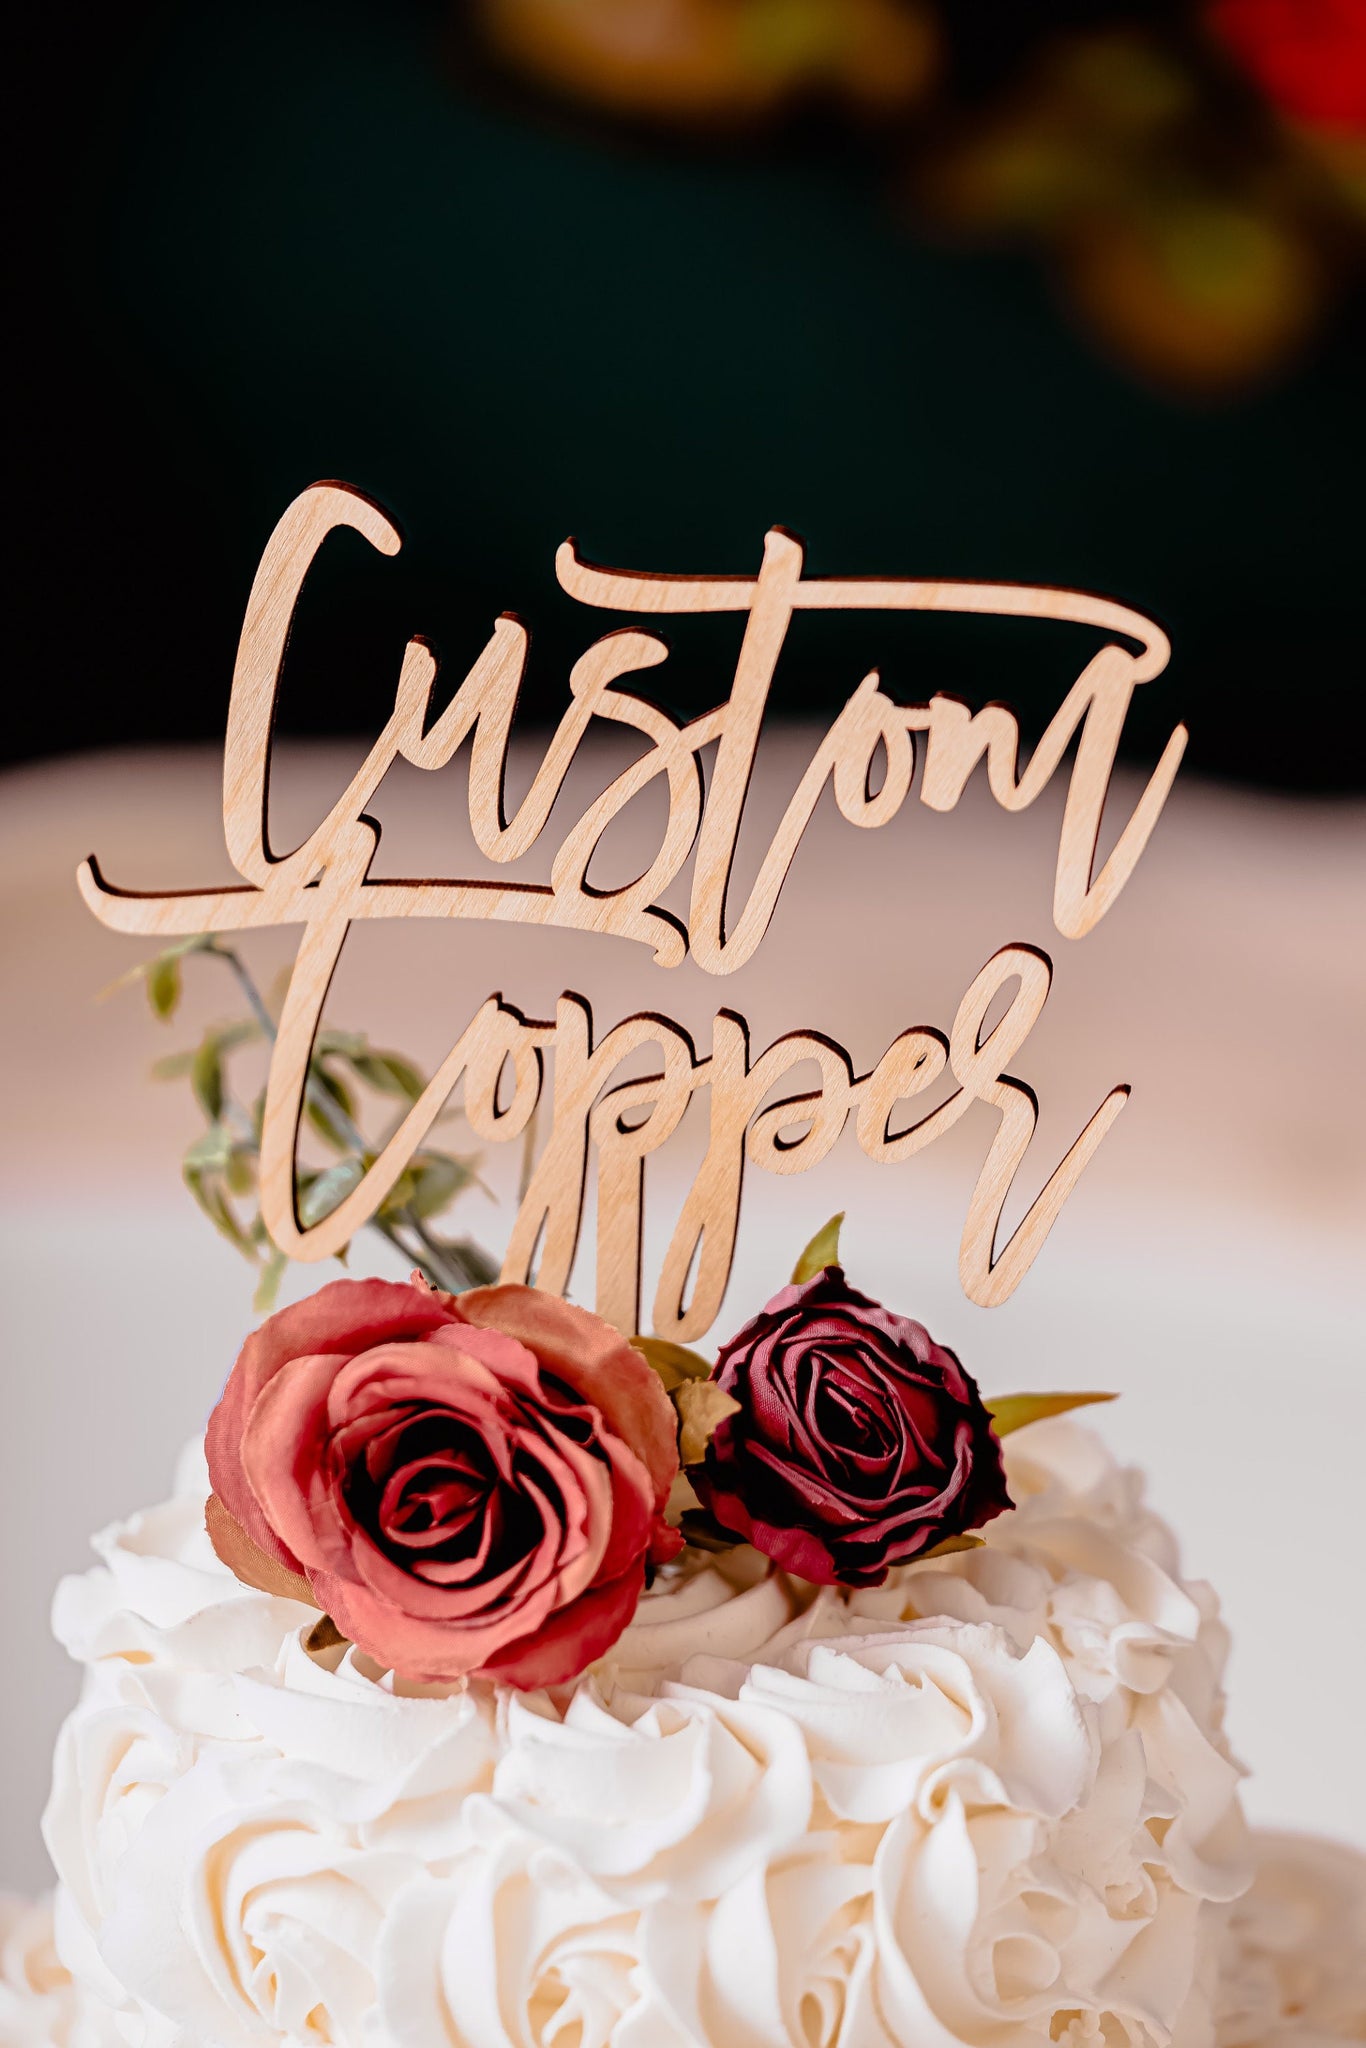 Personalized Custom Wooden Cake Topper For Birthday Baby Shower Funny Wedding Cake Charm For Christening Baptism First Communion